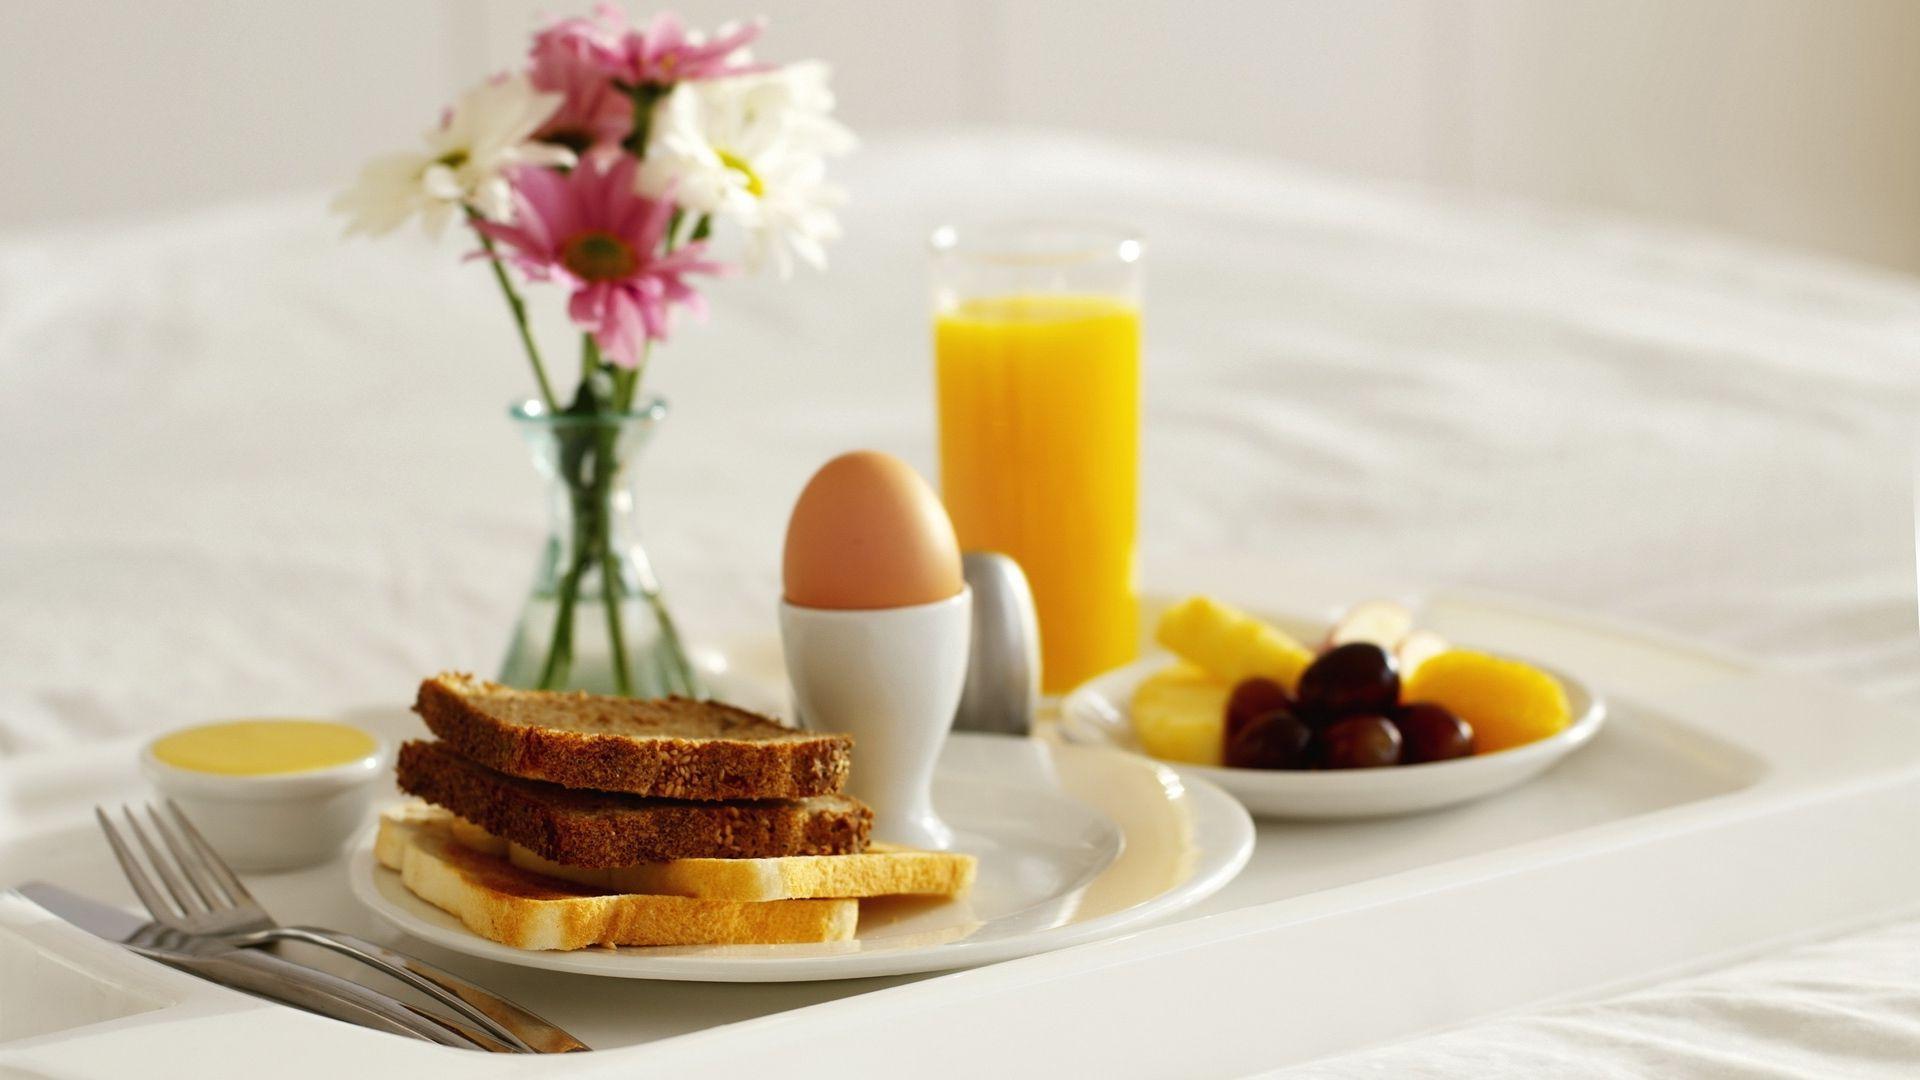 Download Wallpaper 1920x1080 Breakfast, Egg, Juice, Toasts, Laying